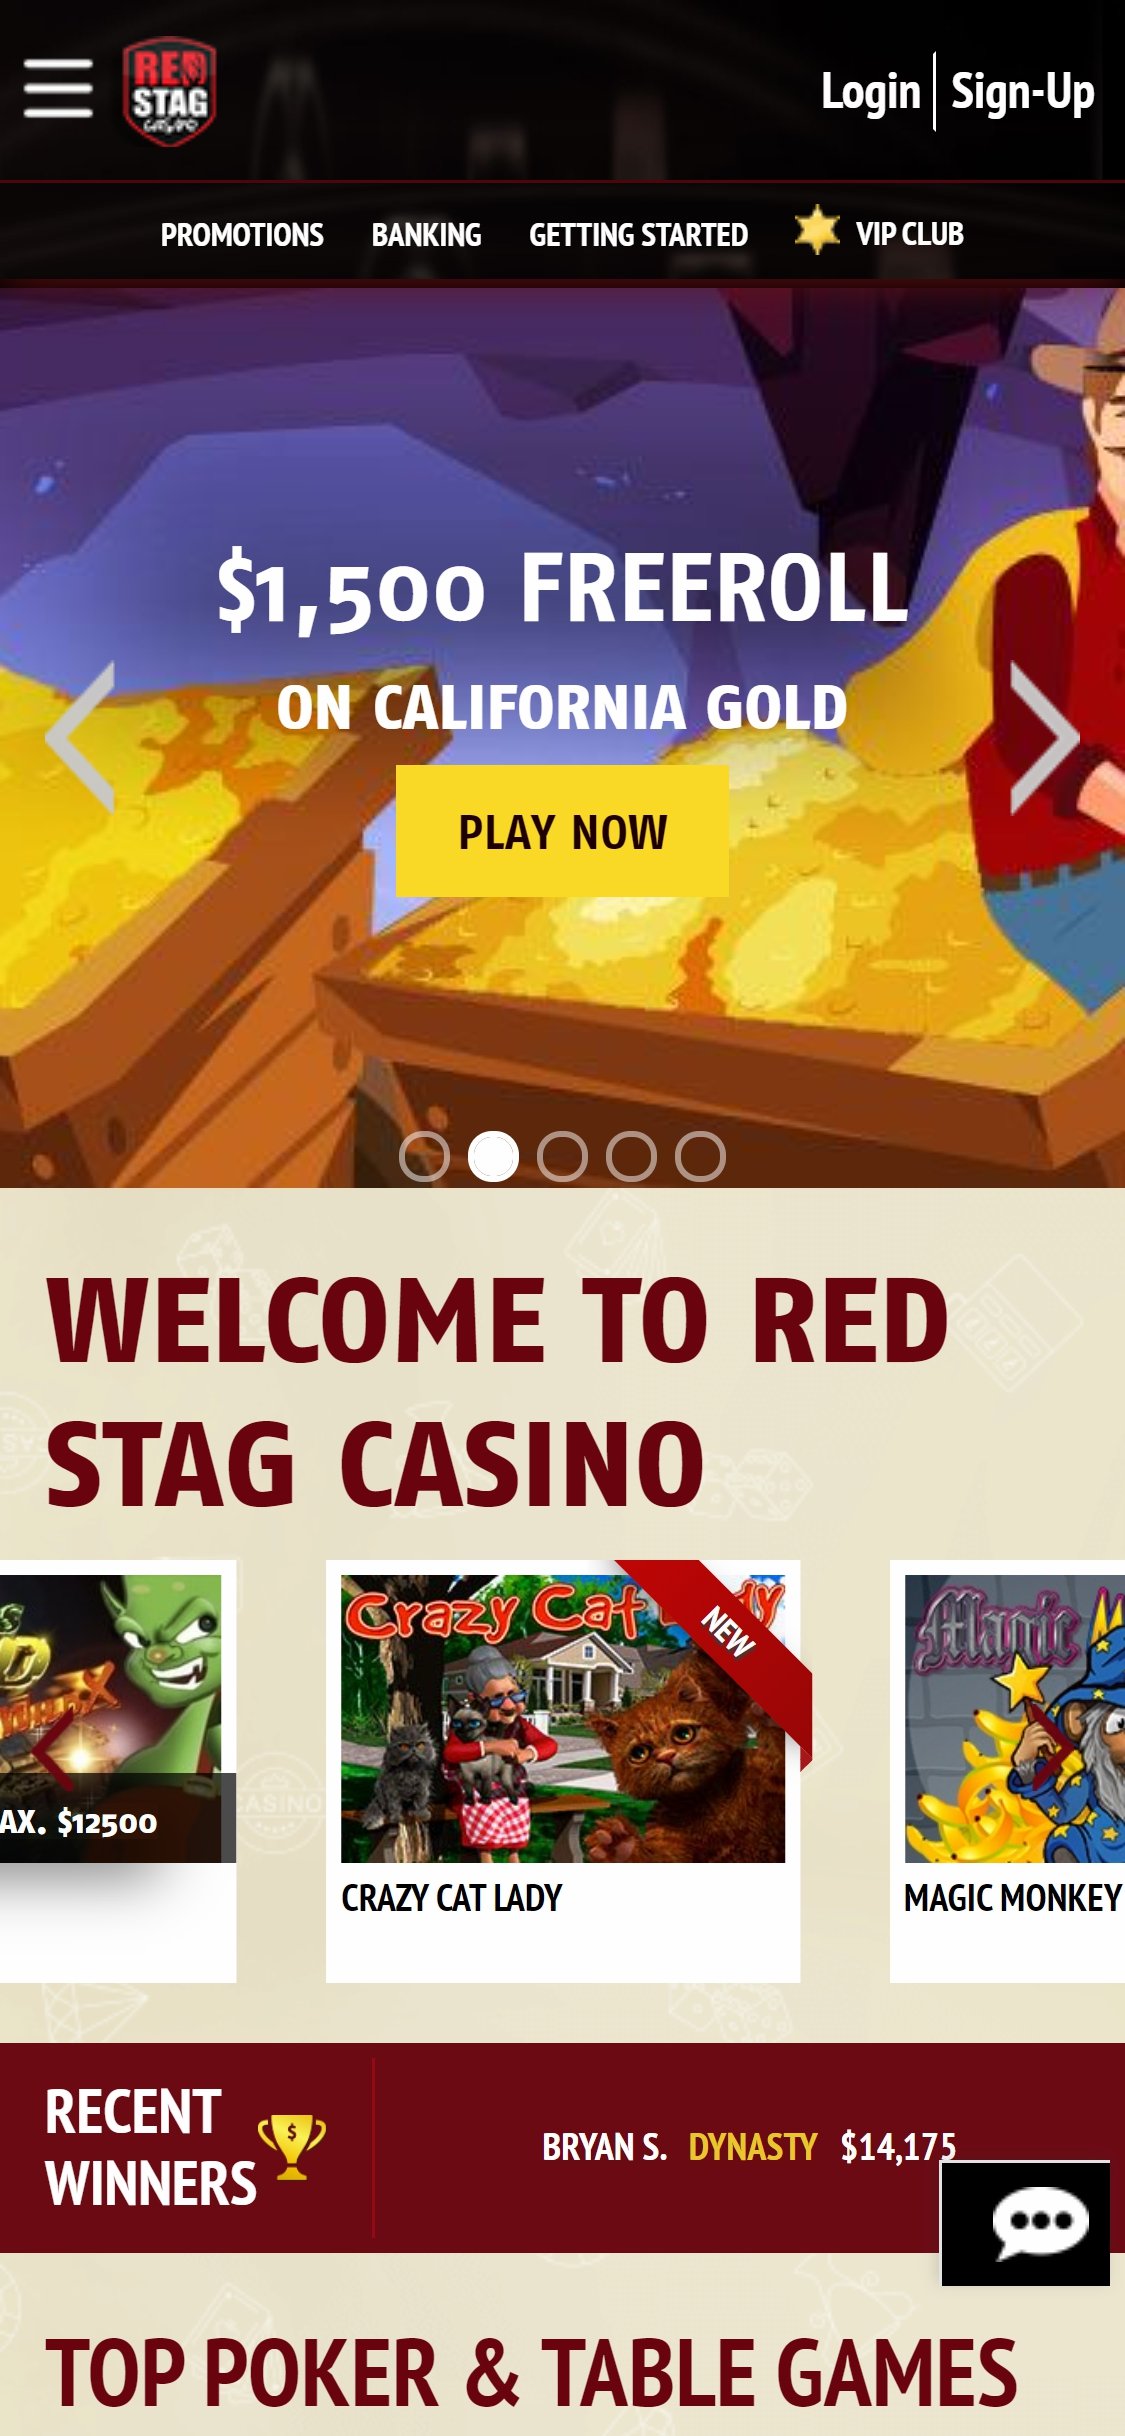 Red Stag Casino Mobile Review